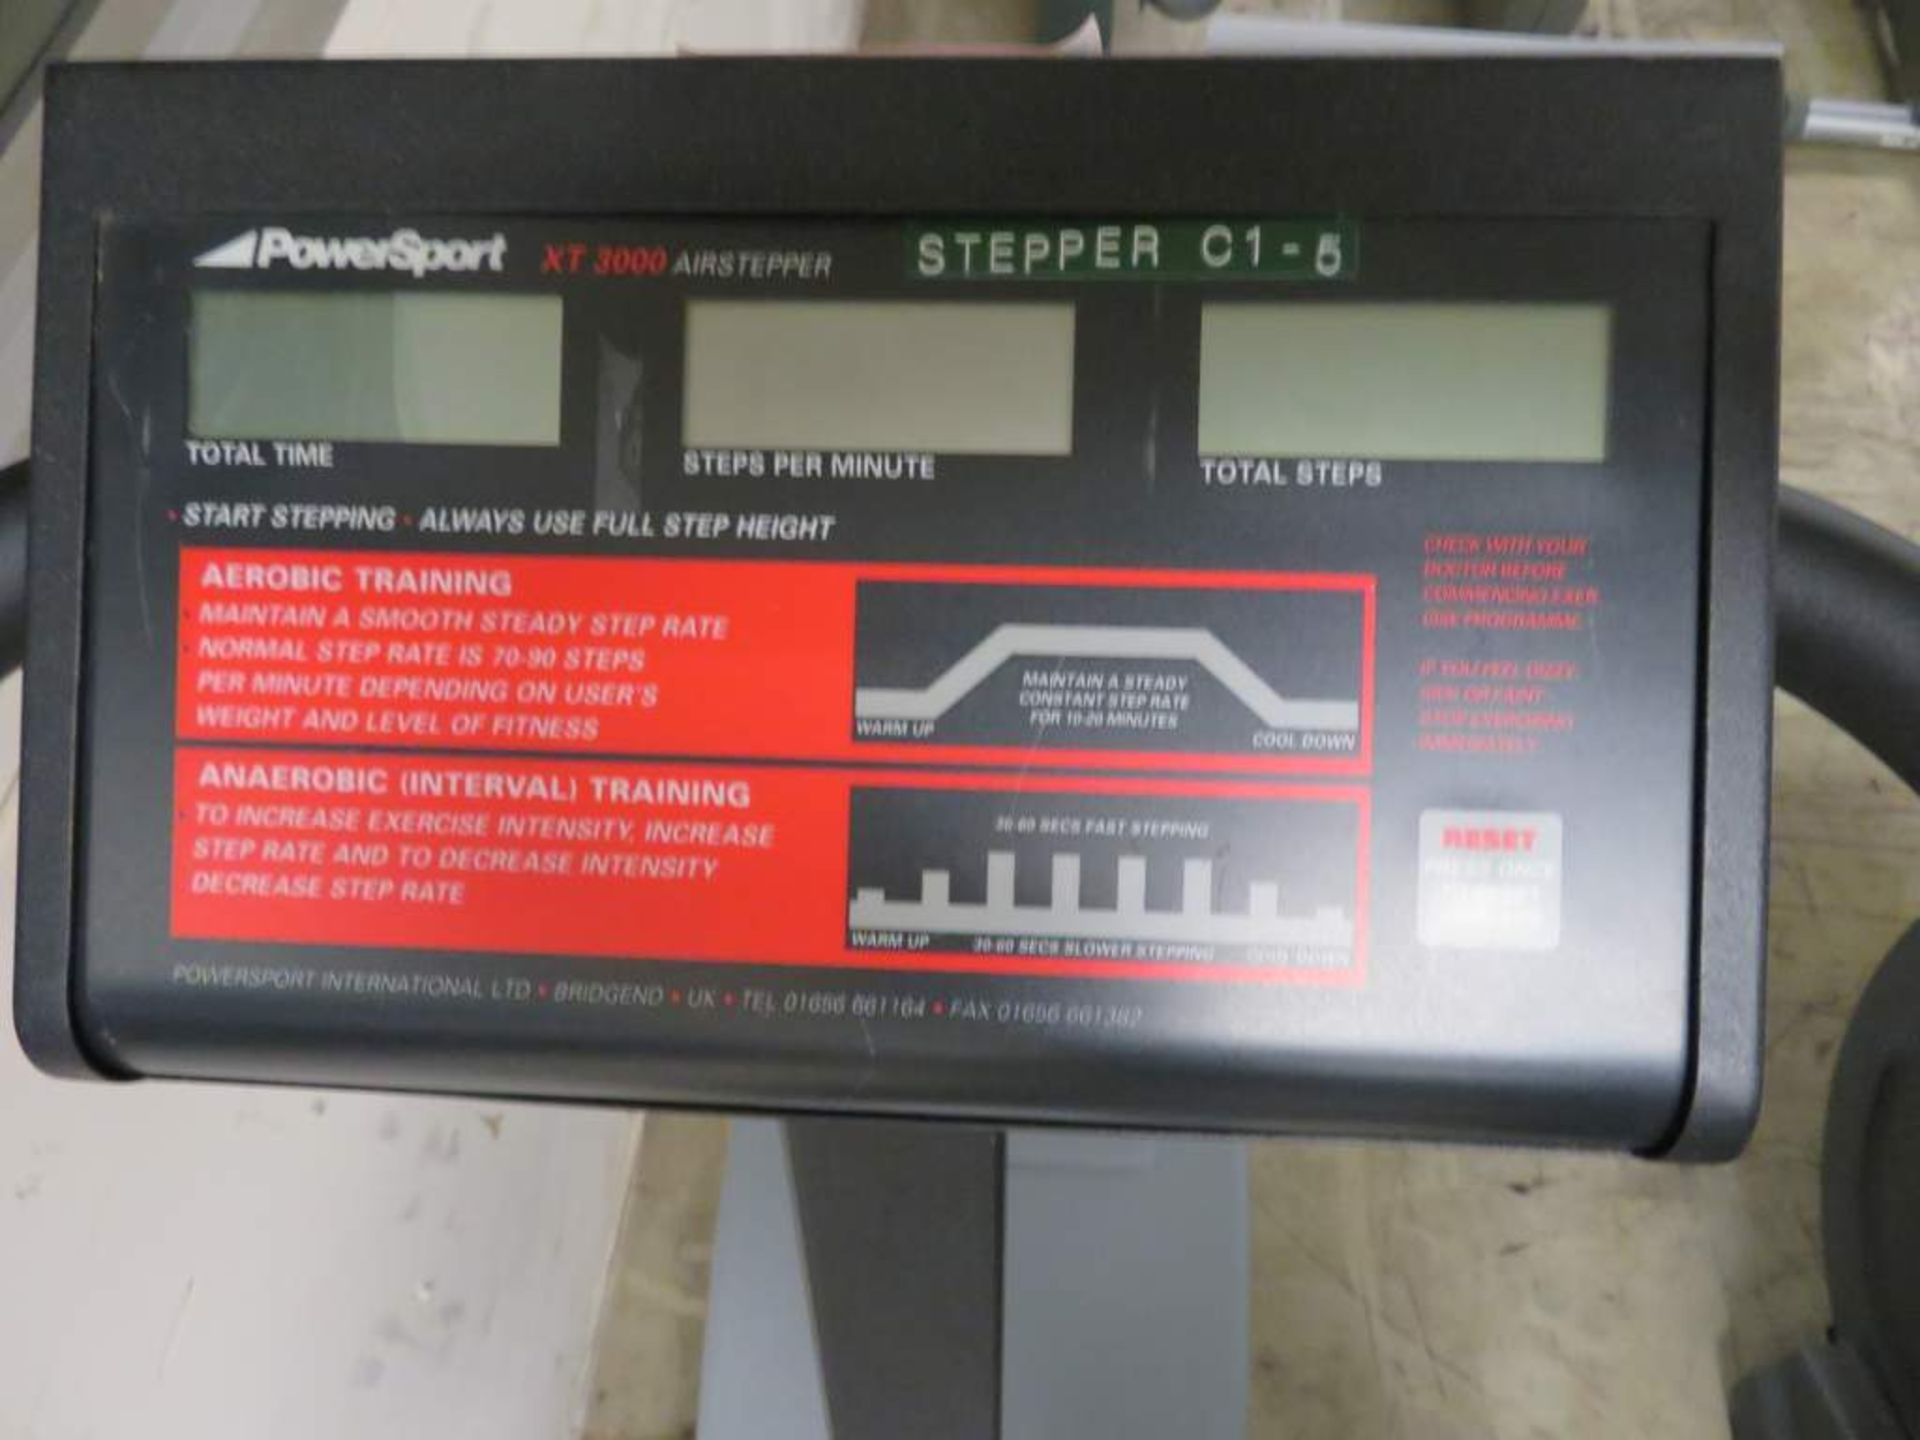 Power Sport XT 3000 Air Stepper Exercise Machine - Image 5 of 6